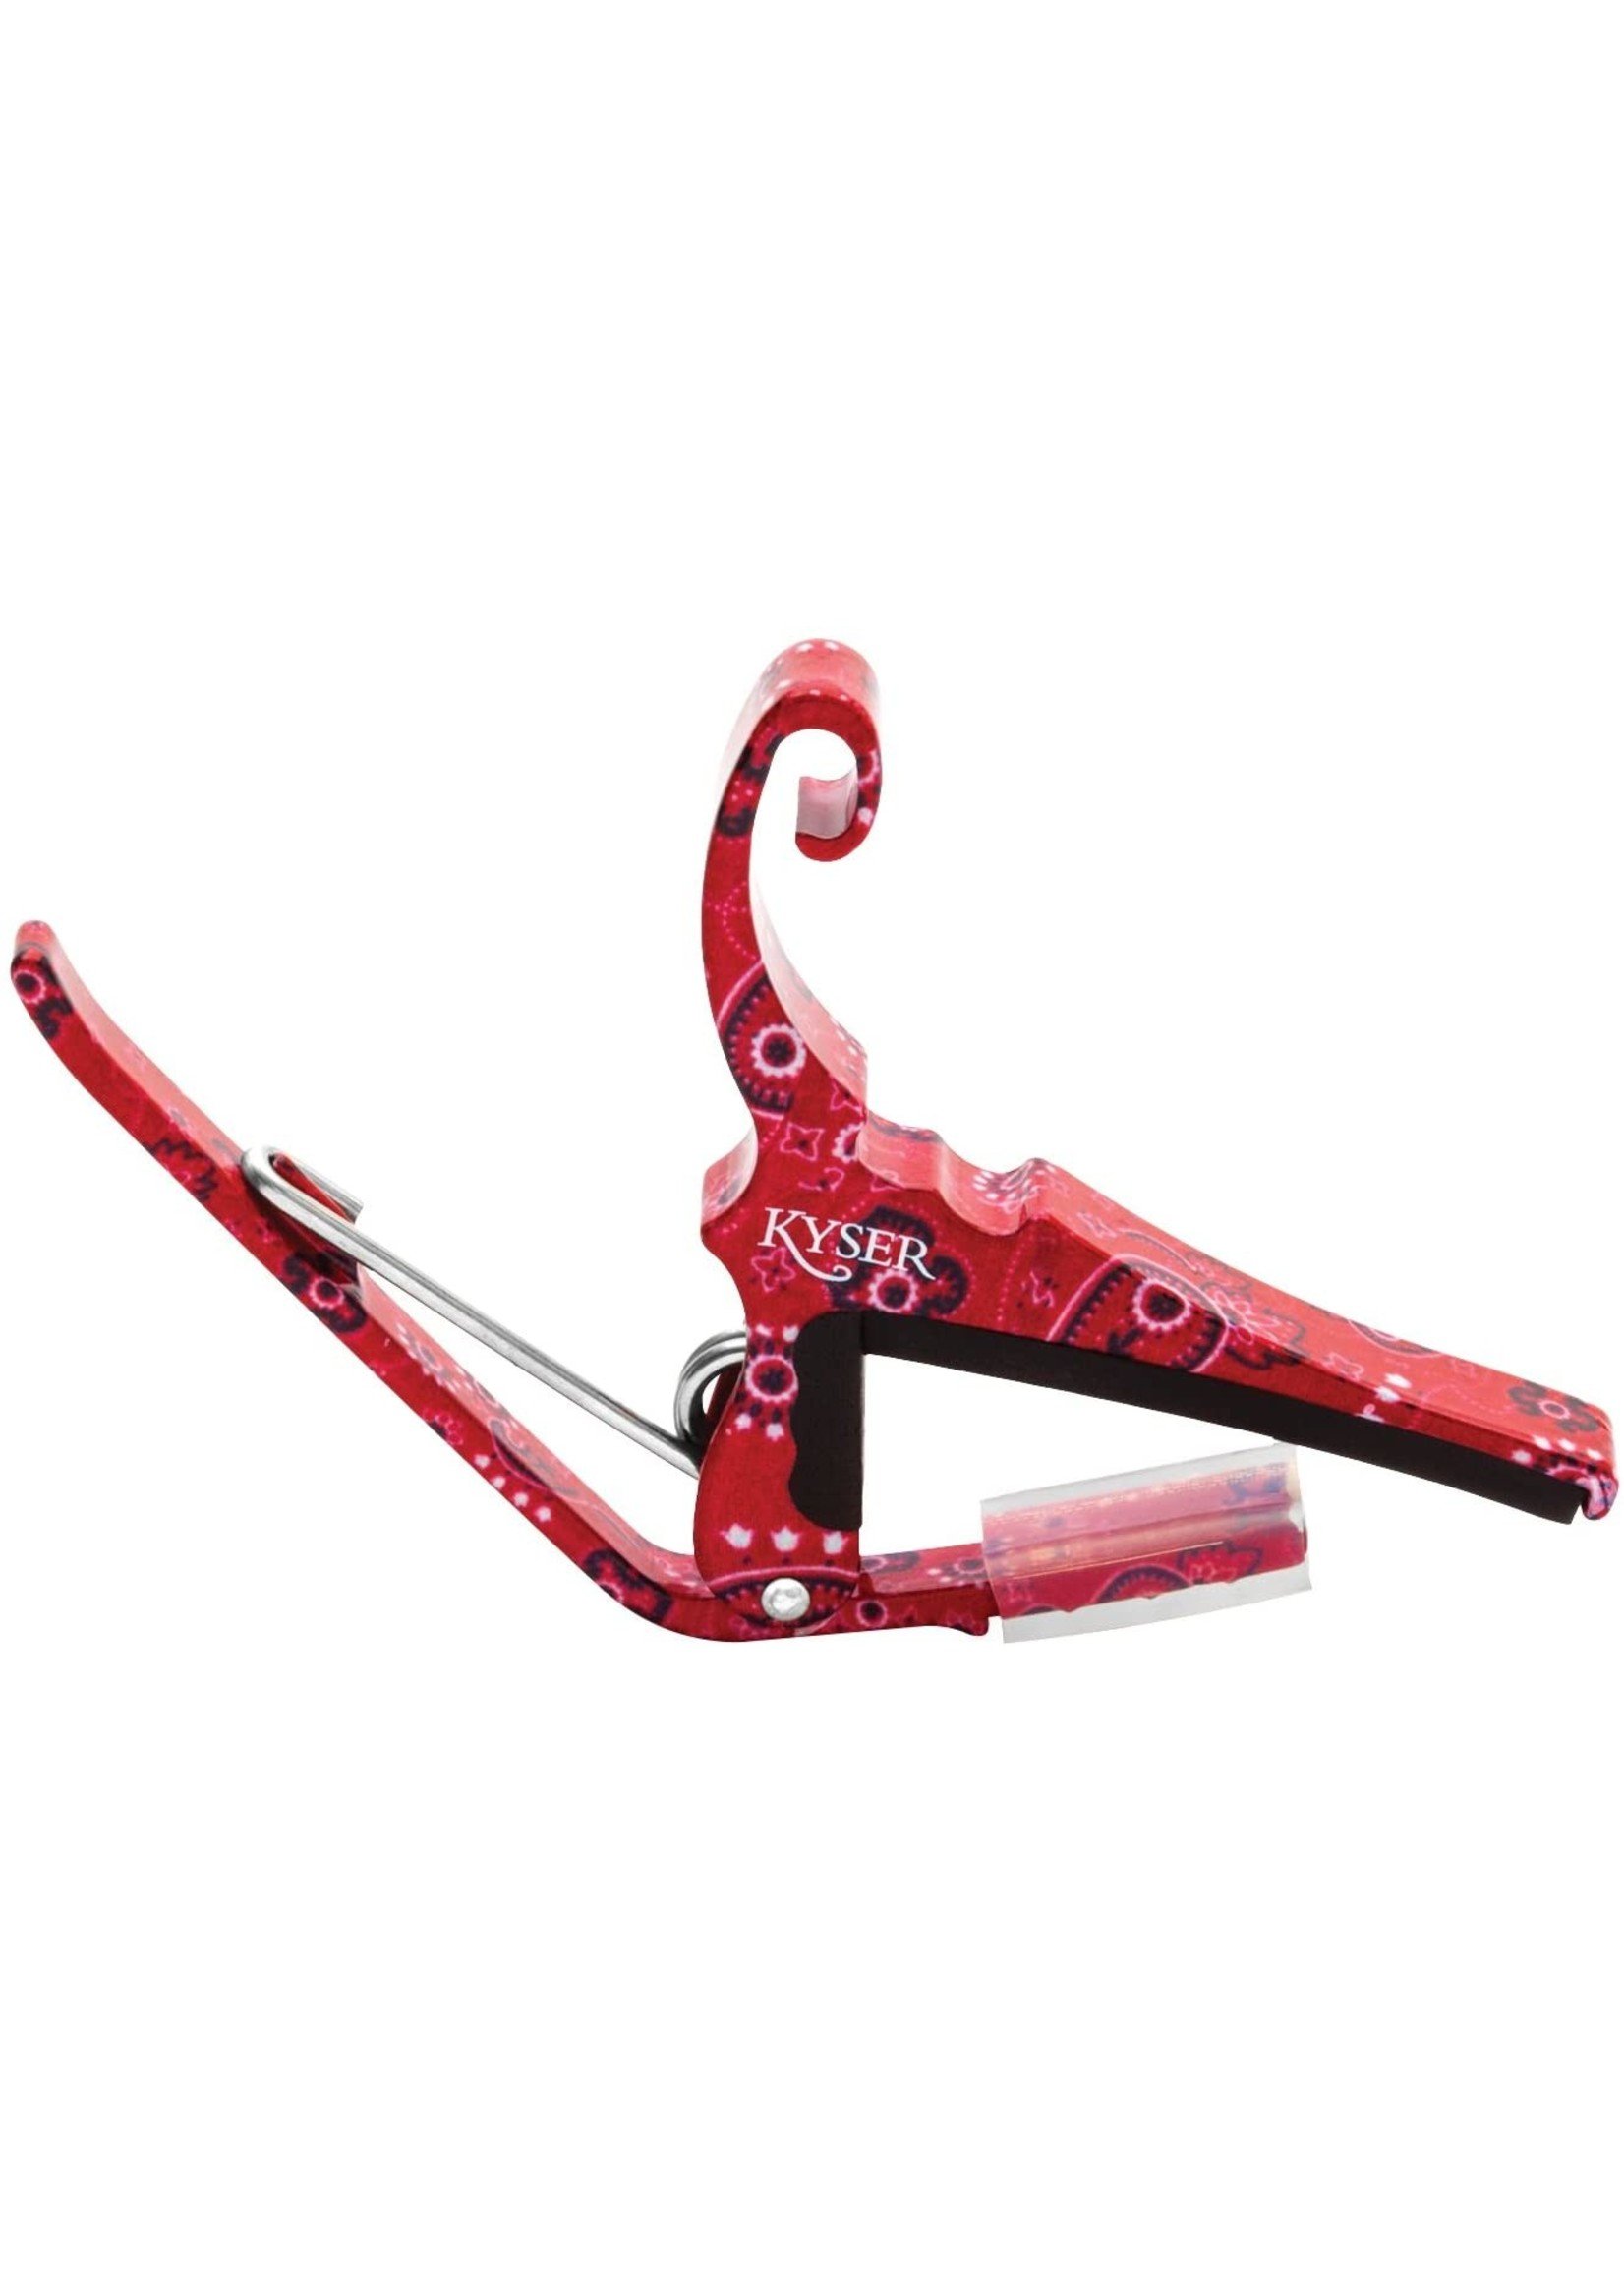 kyser Kyser Acoustic Quick Change Capo-6 String Red Bandana